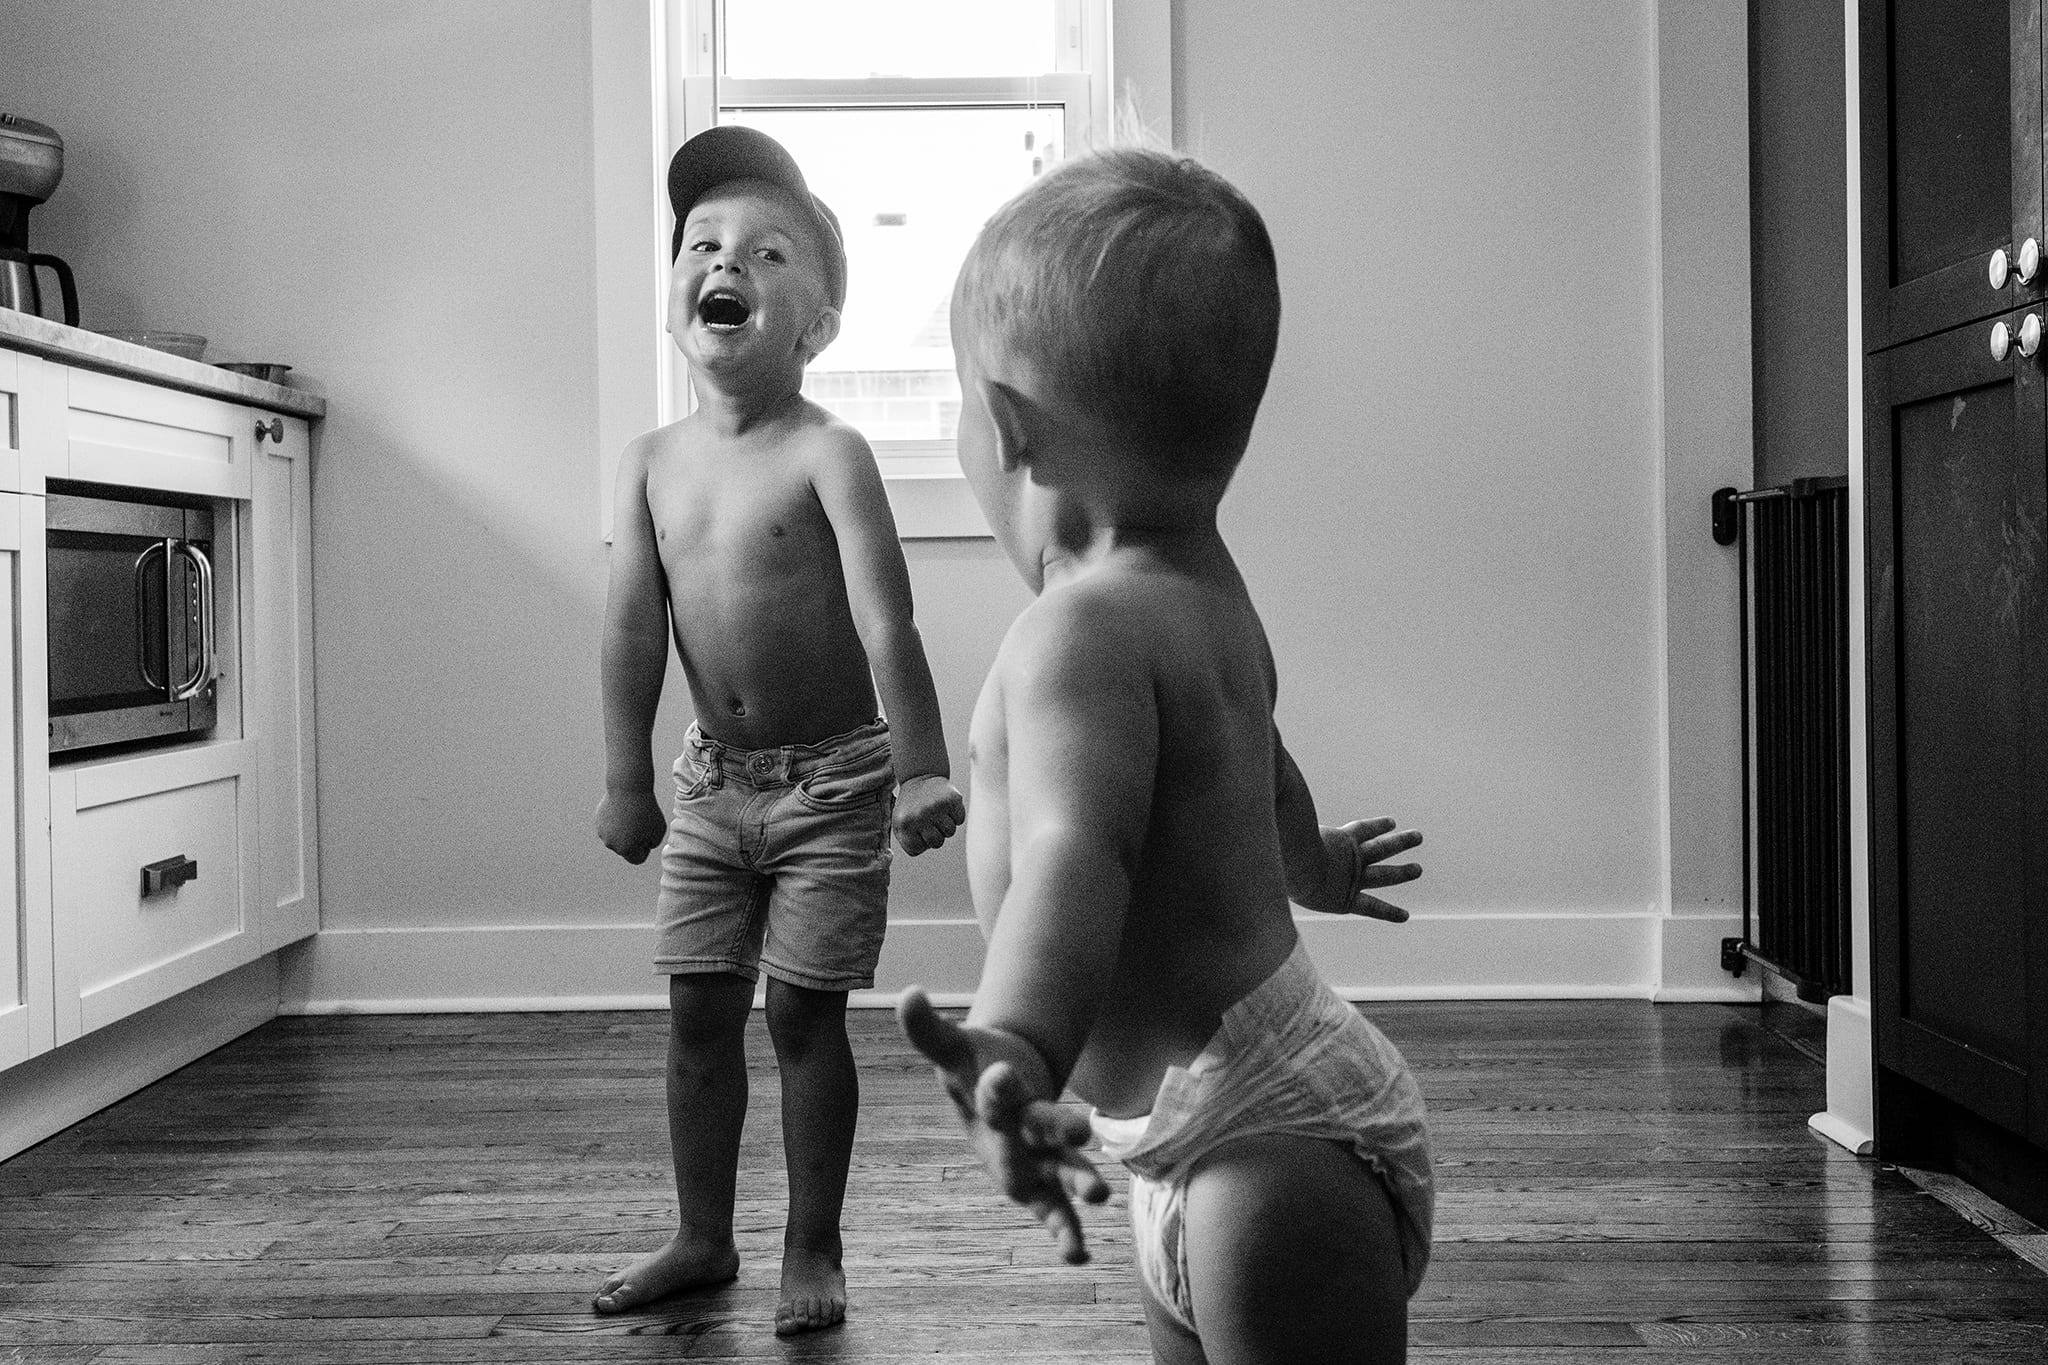 shirtless boy yells happily while toddler brother stretches arms